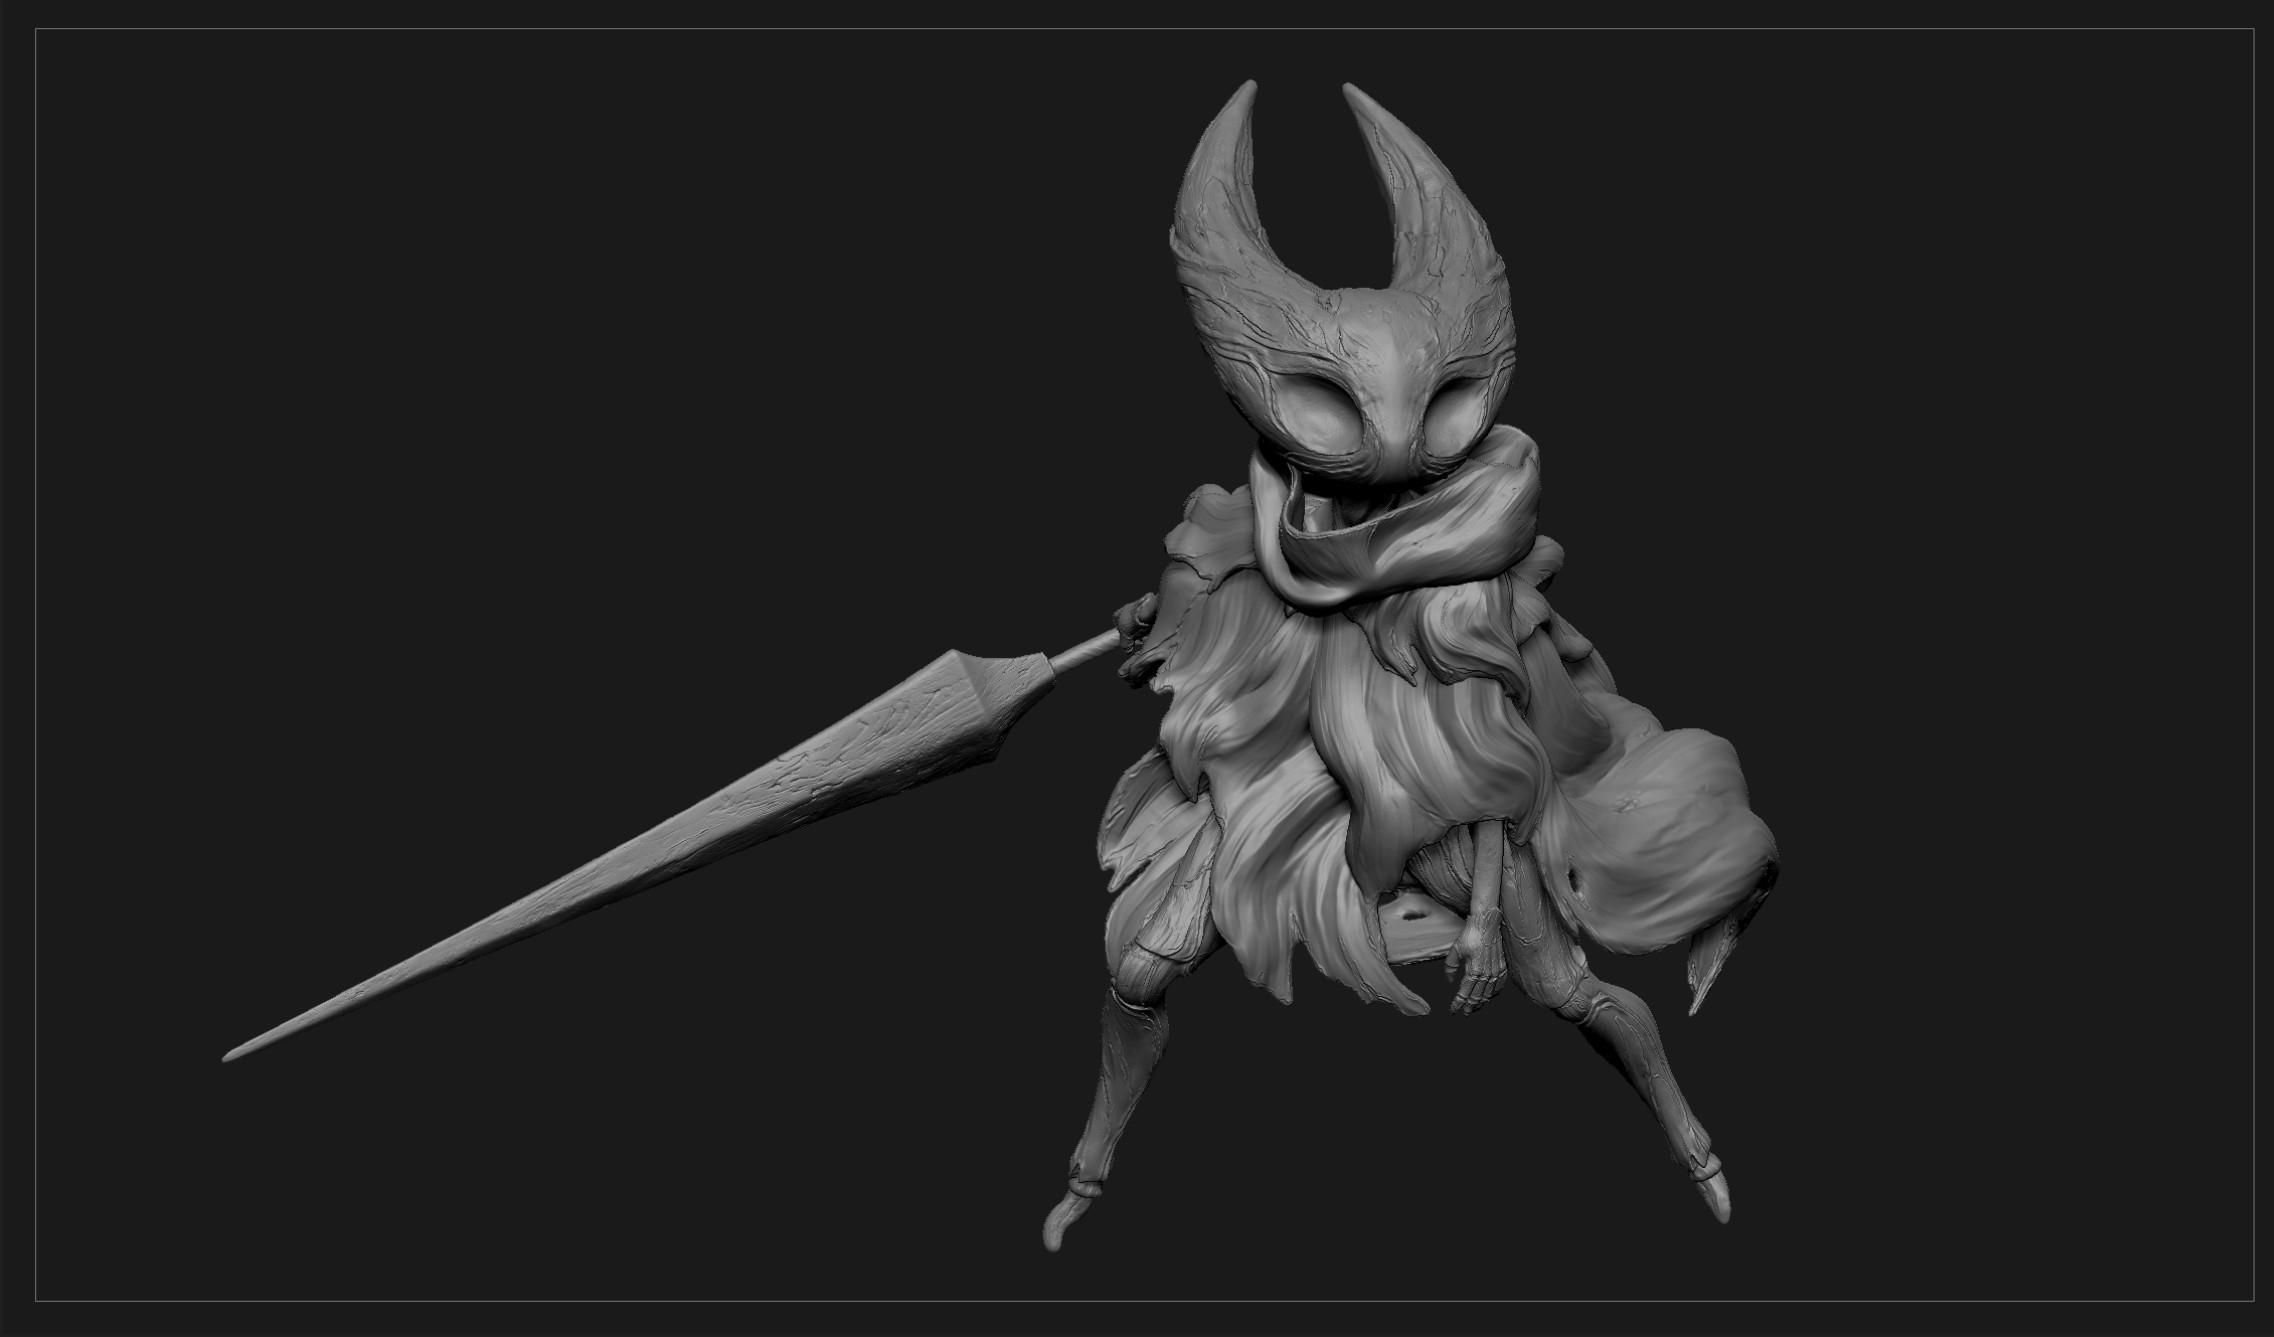 3D Printable The Pale King, Hollow Knight/Dark Souls mash up by Ogareg  Miniatures